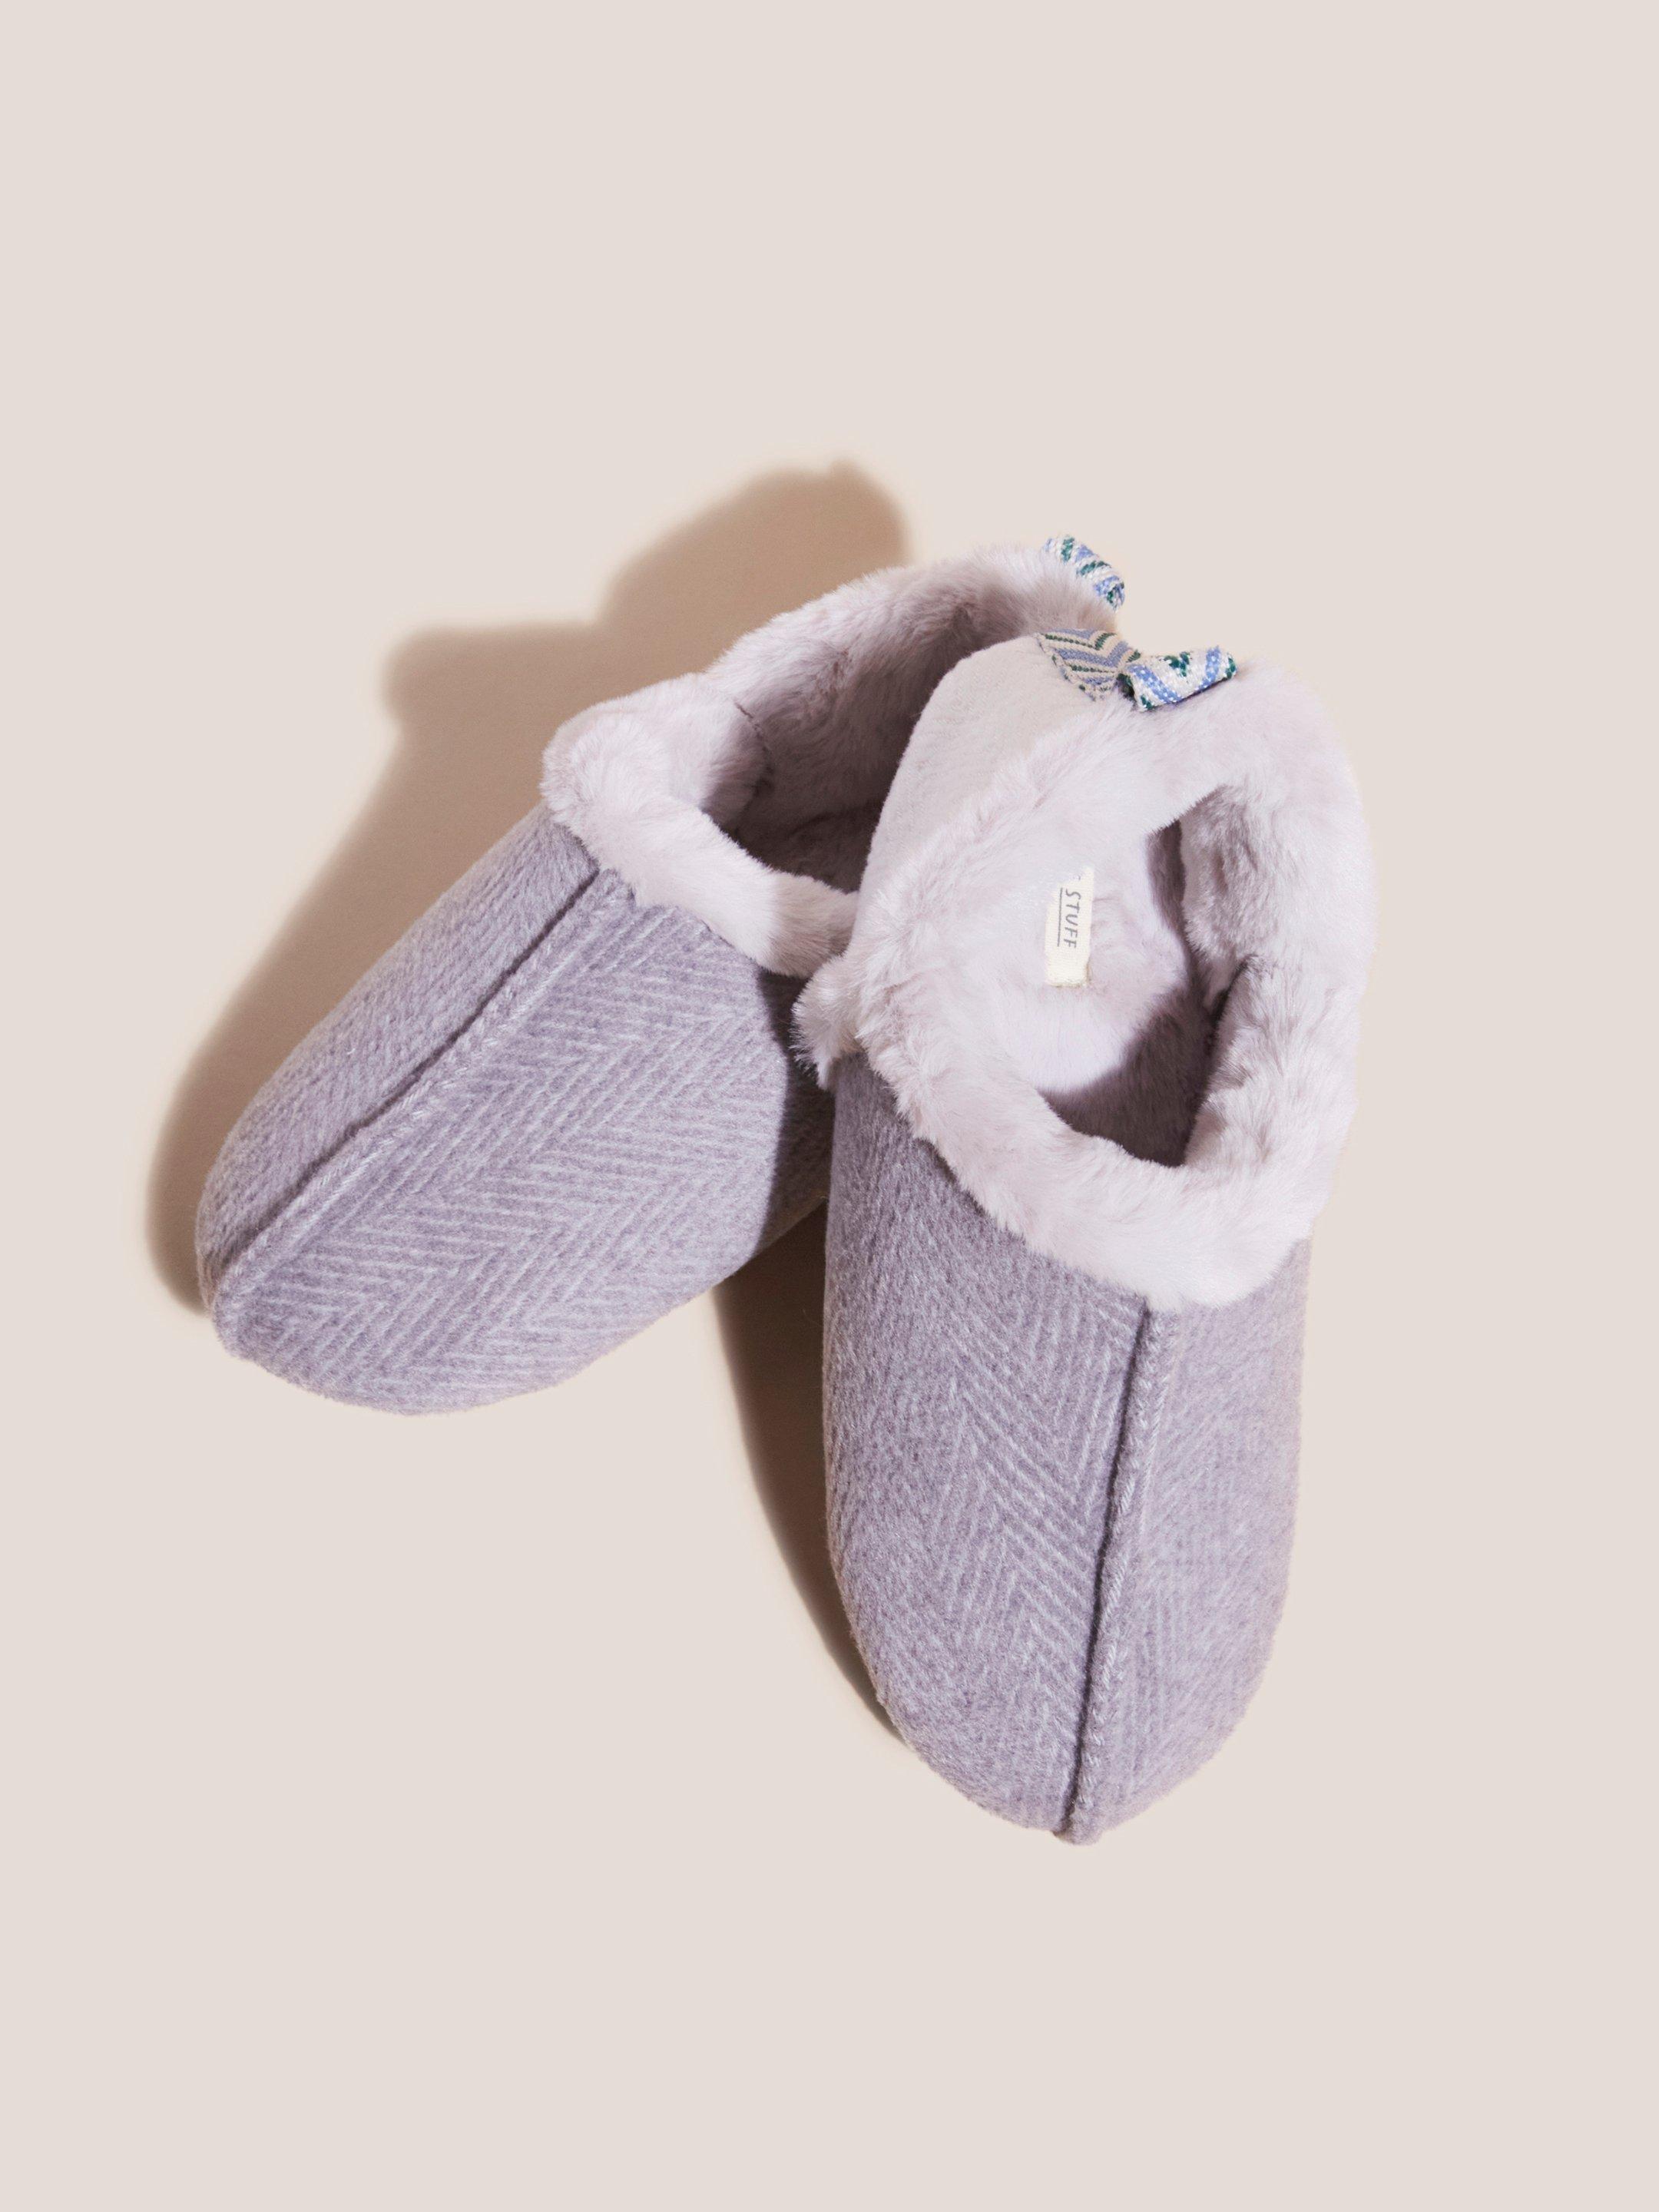 Reya Closed Back Slippers in LGT GREY - FLAT DETAIL